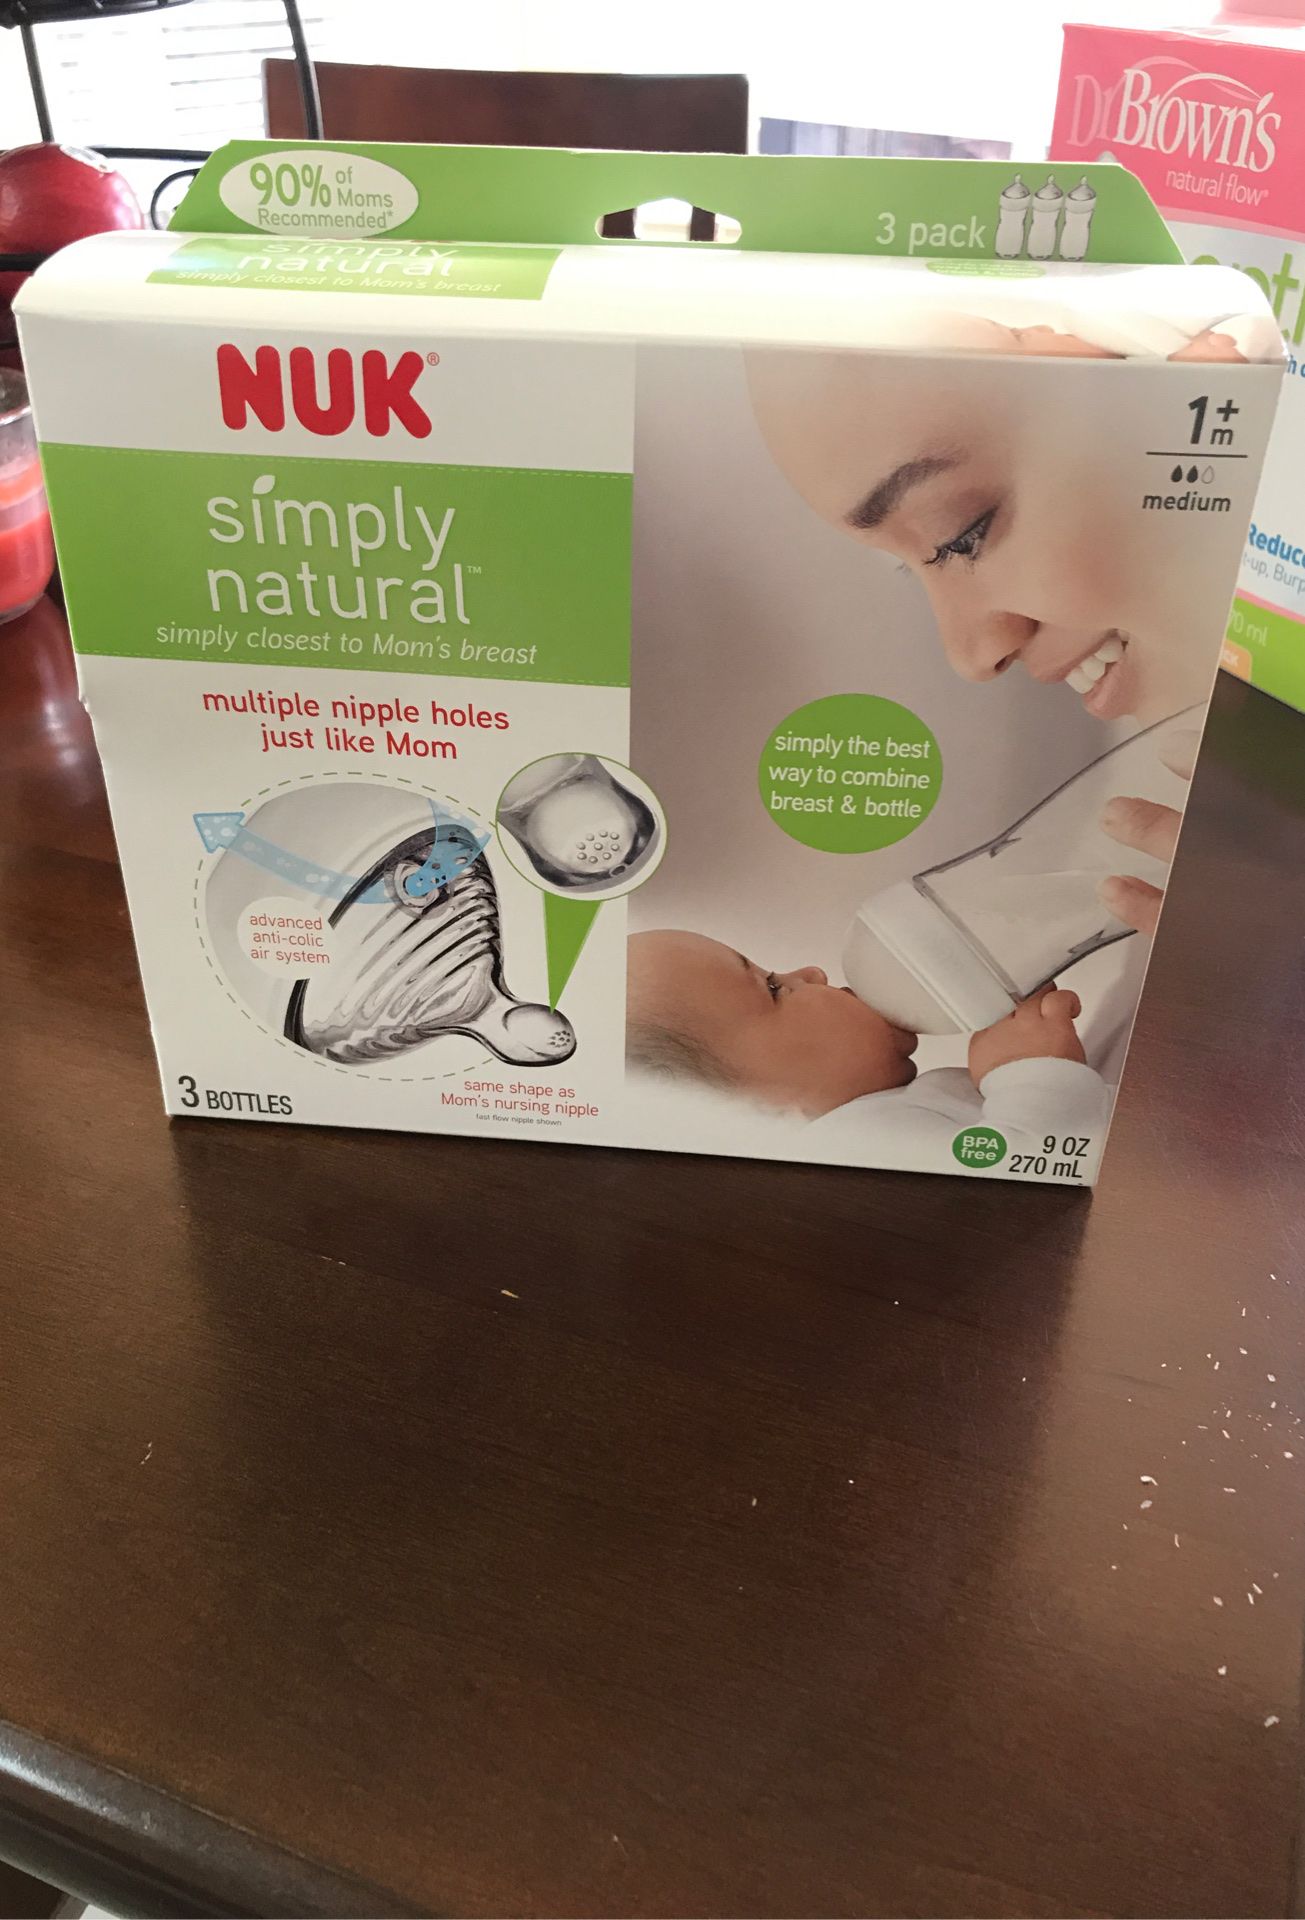 Nuk simply natural bottle